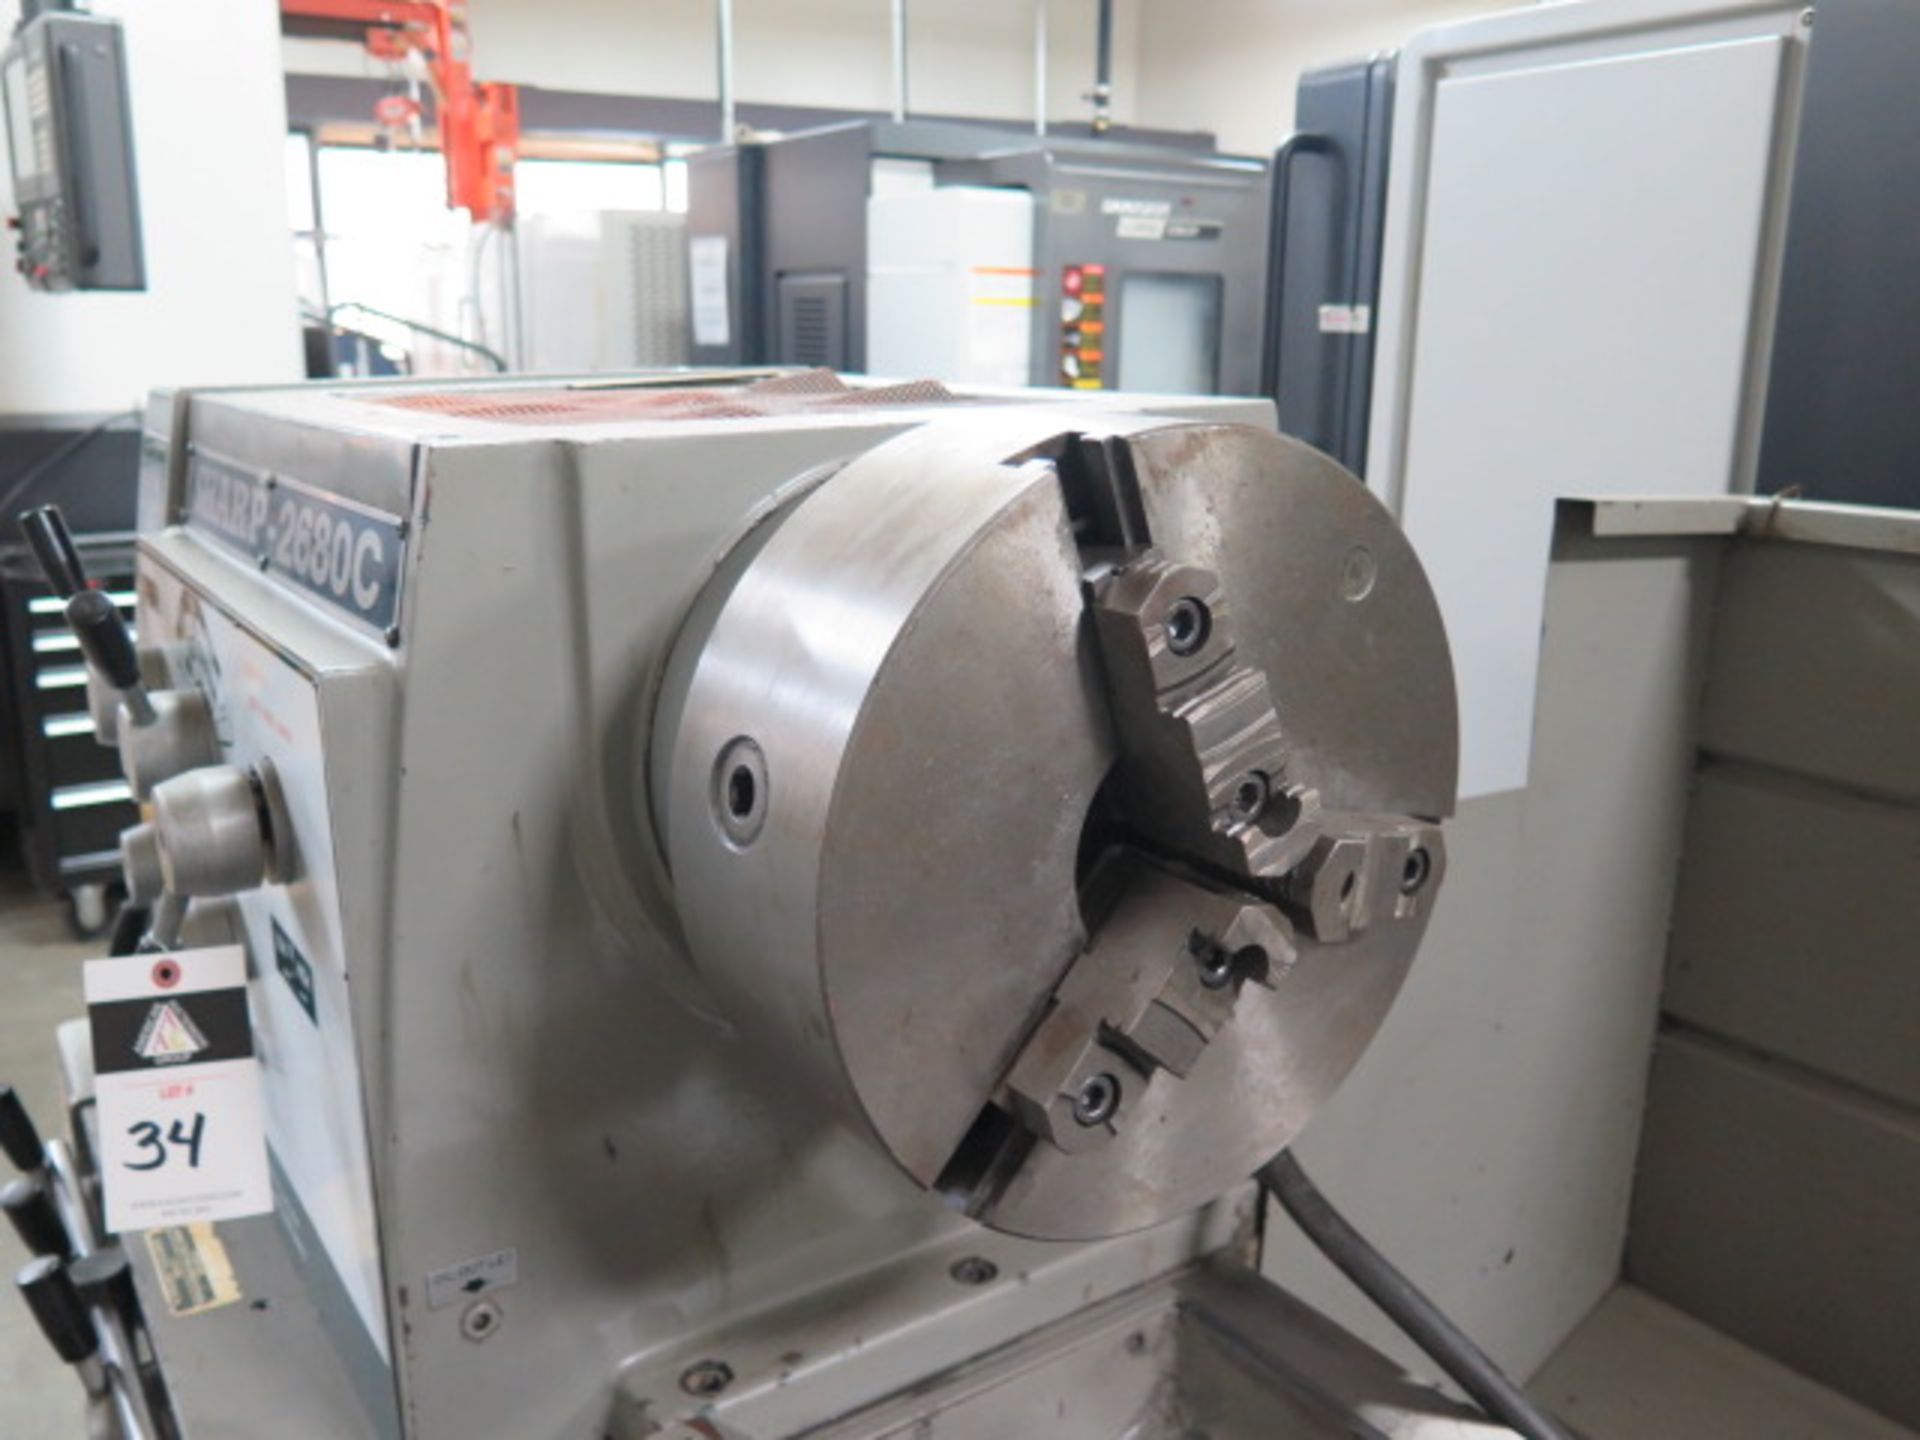 1996 Sharp 2680C 26” x 80” Geared Head – Gap Bed Lathe s/n 4812025 w/ 15-1500 RPM, SOLD AS IS - Image 8 of 17